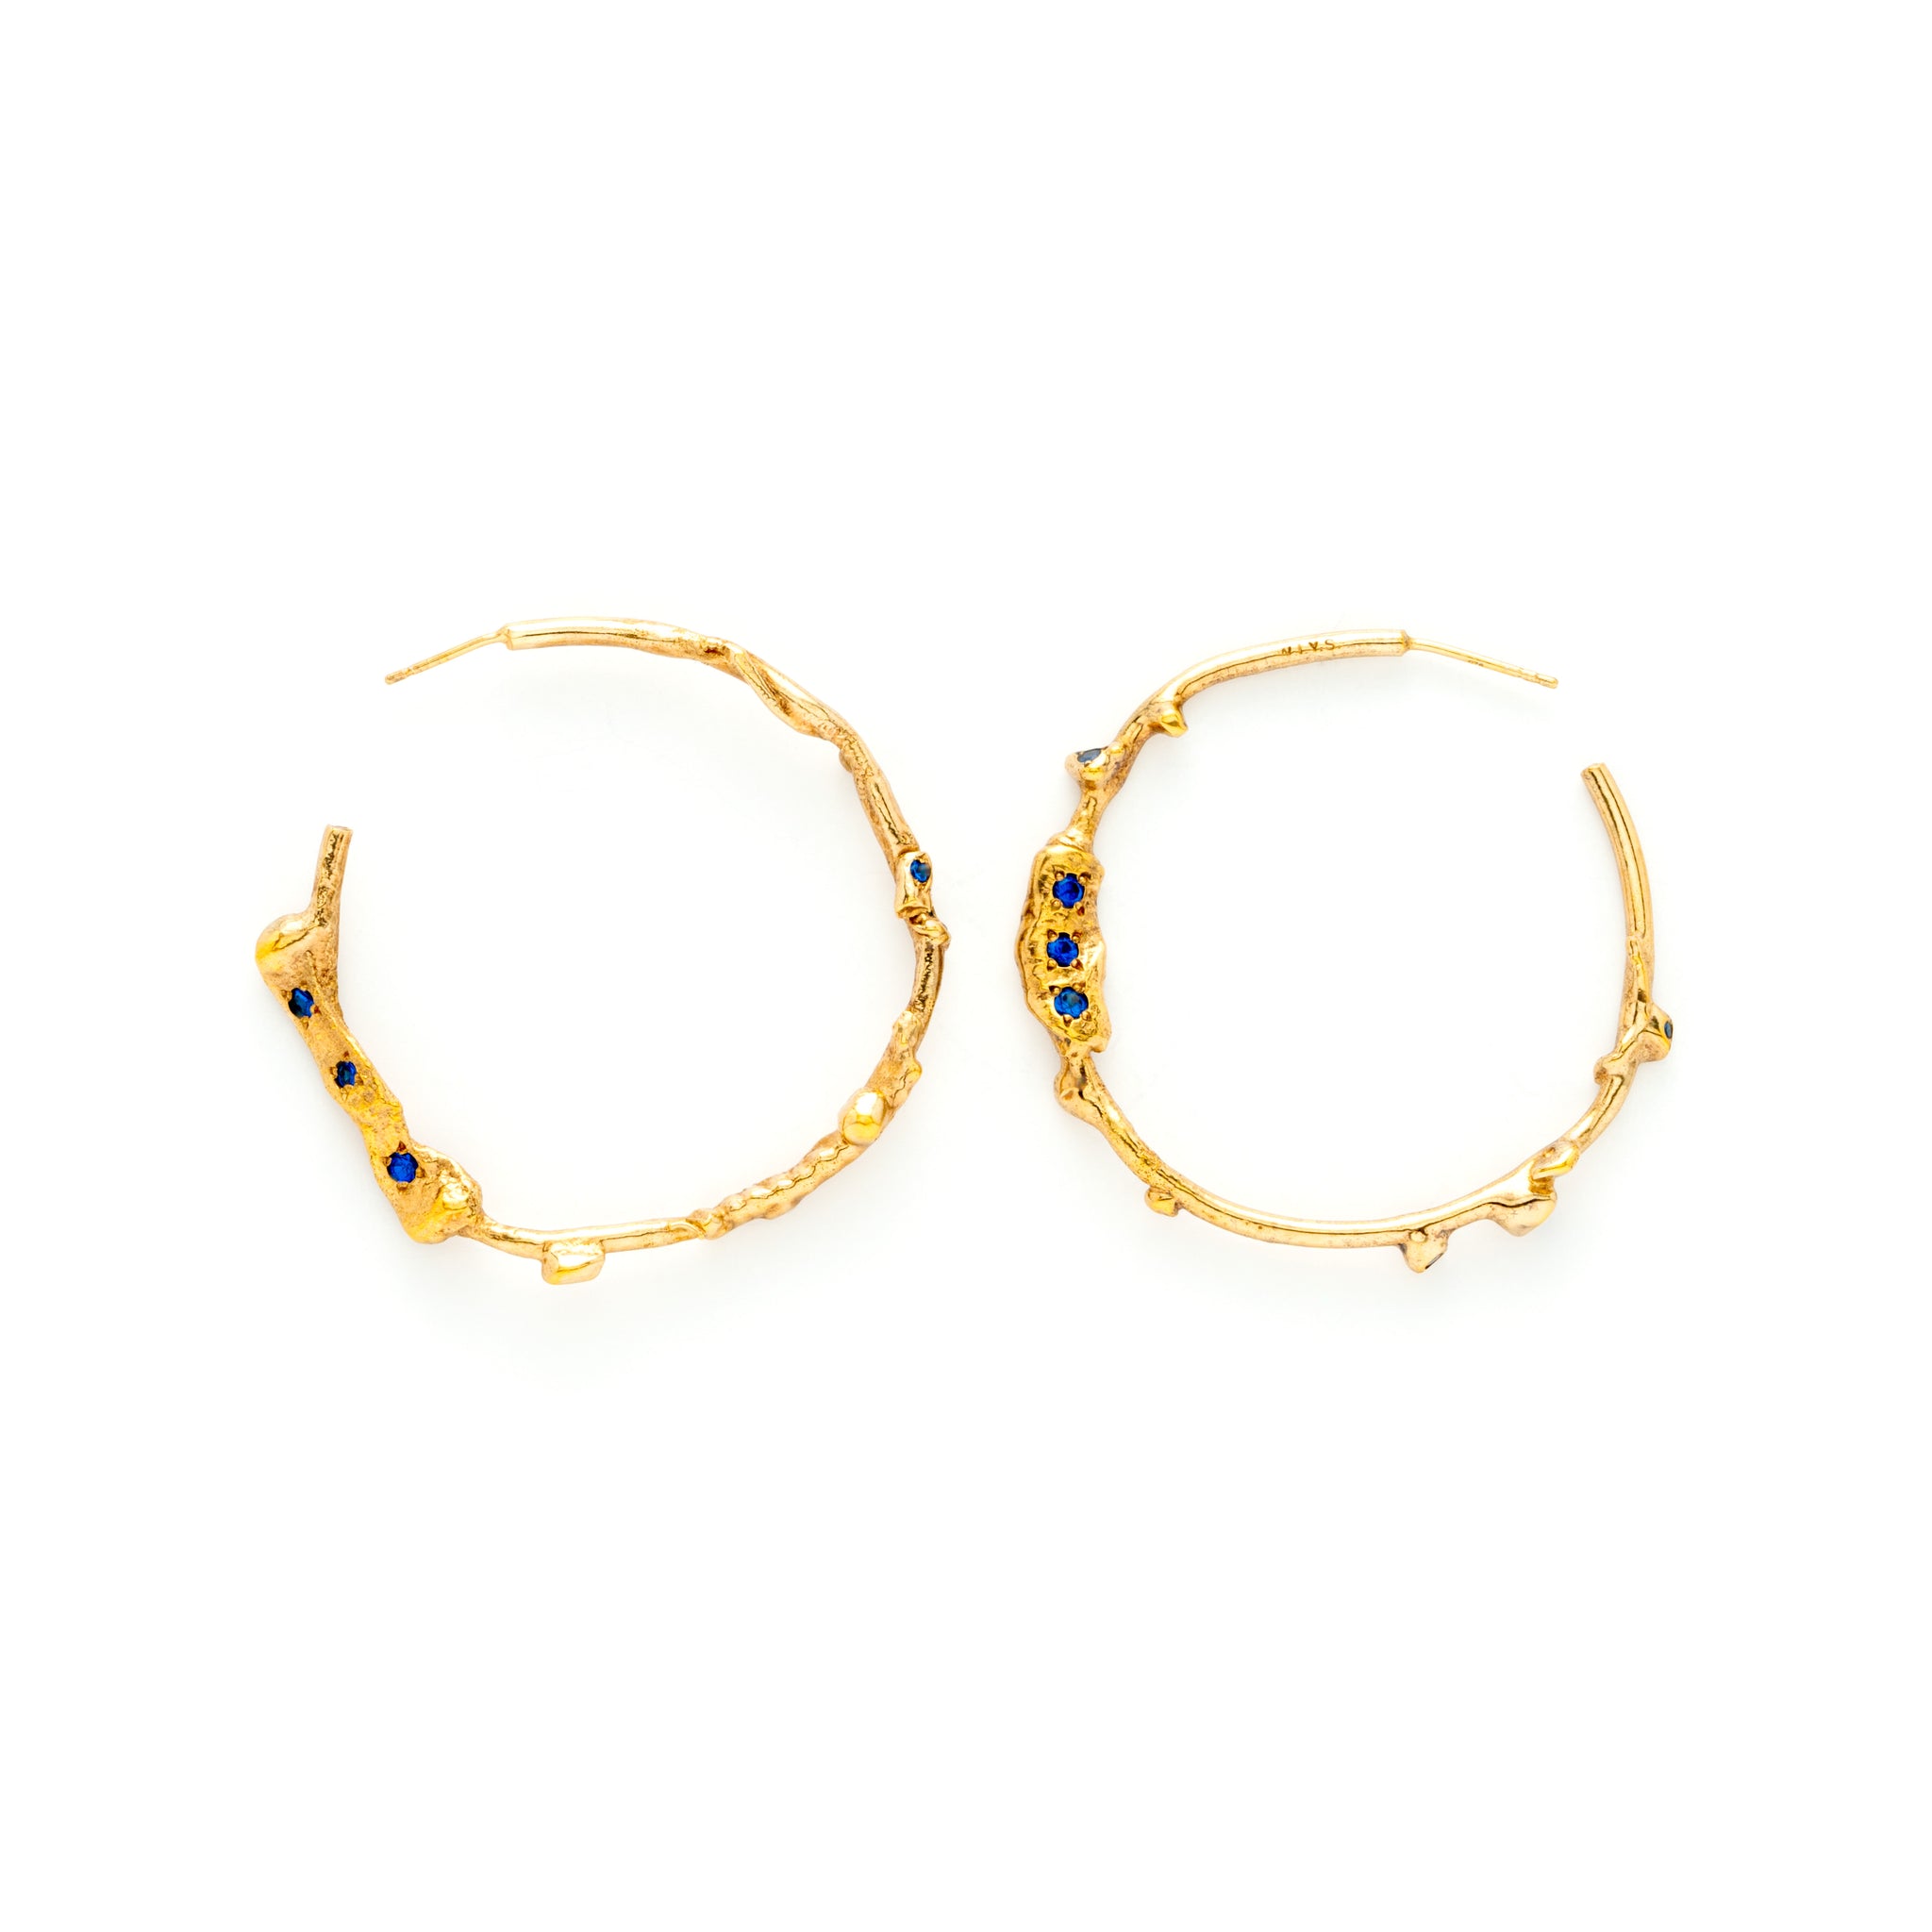 Taormina Earrings in Gold By What If You Stayed Jewelry